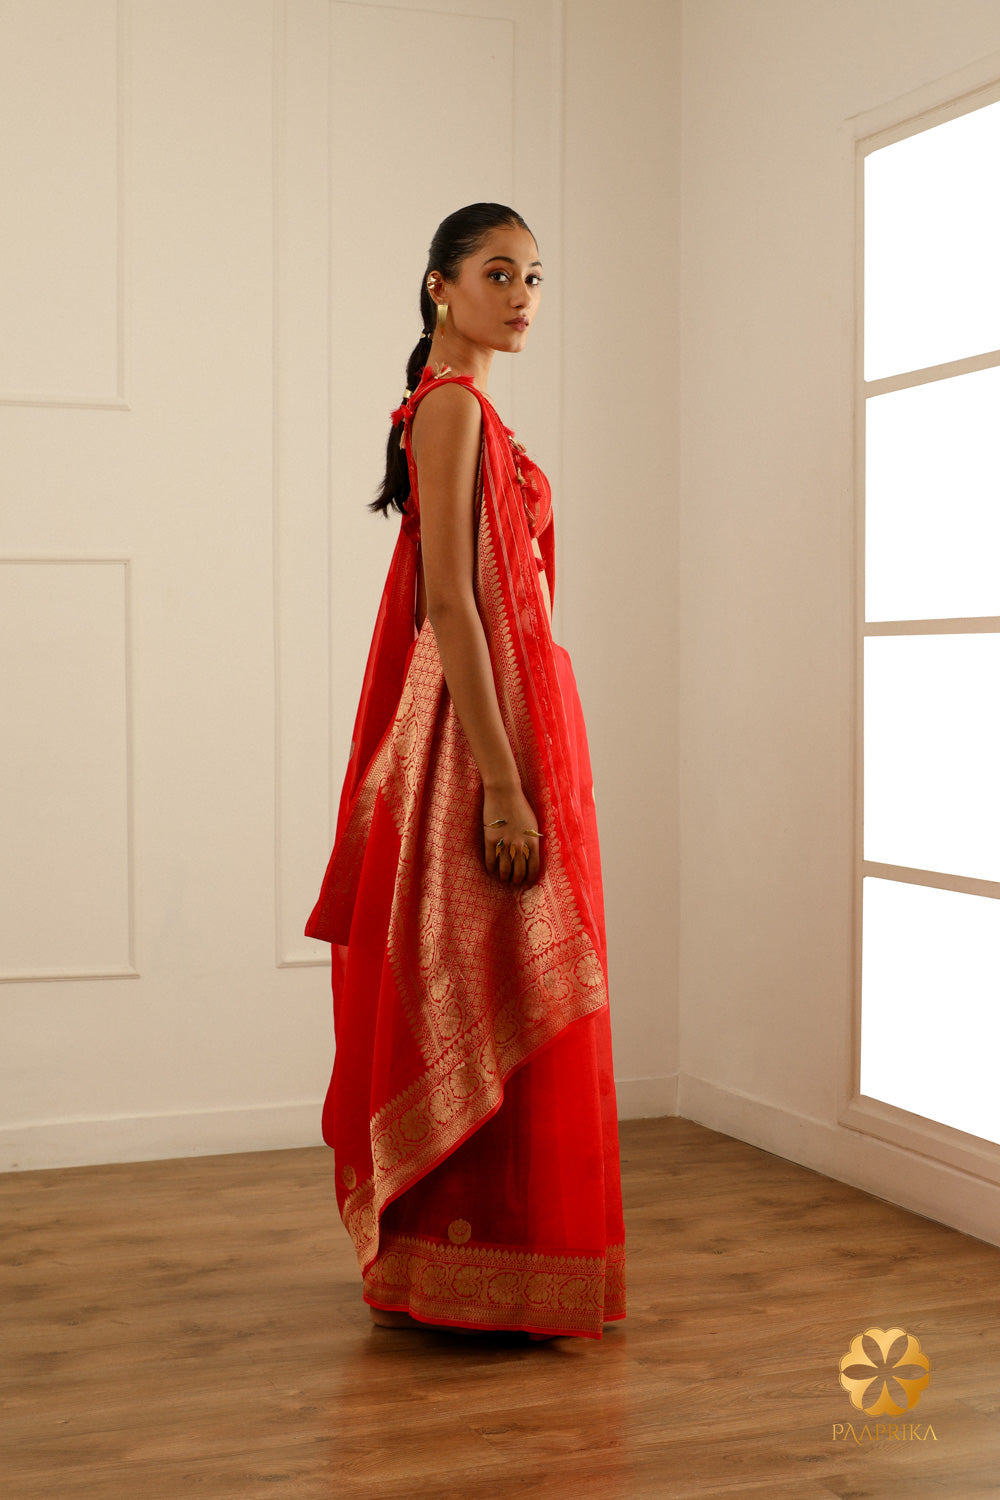 A detailed look at the handwoven floral motifs adorning the saree's delicate fabric.